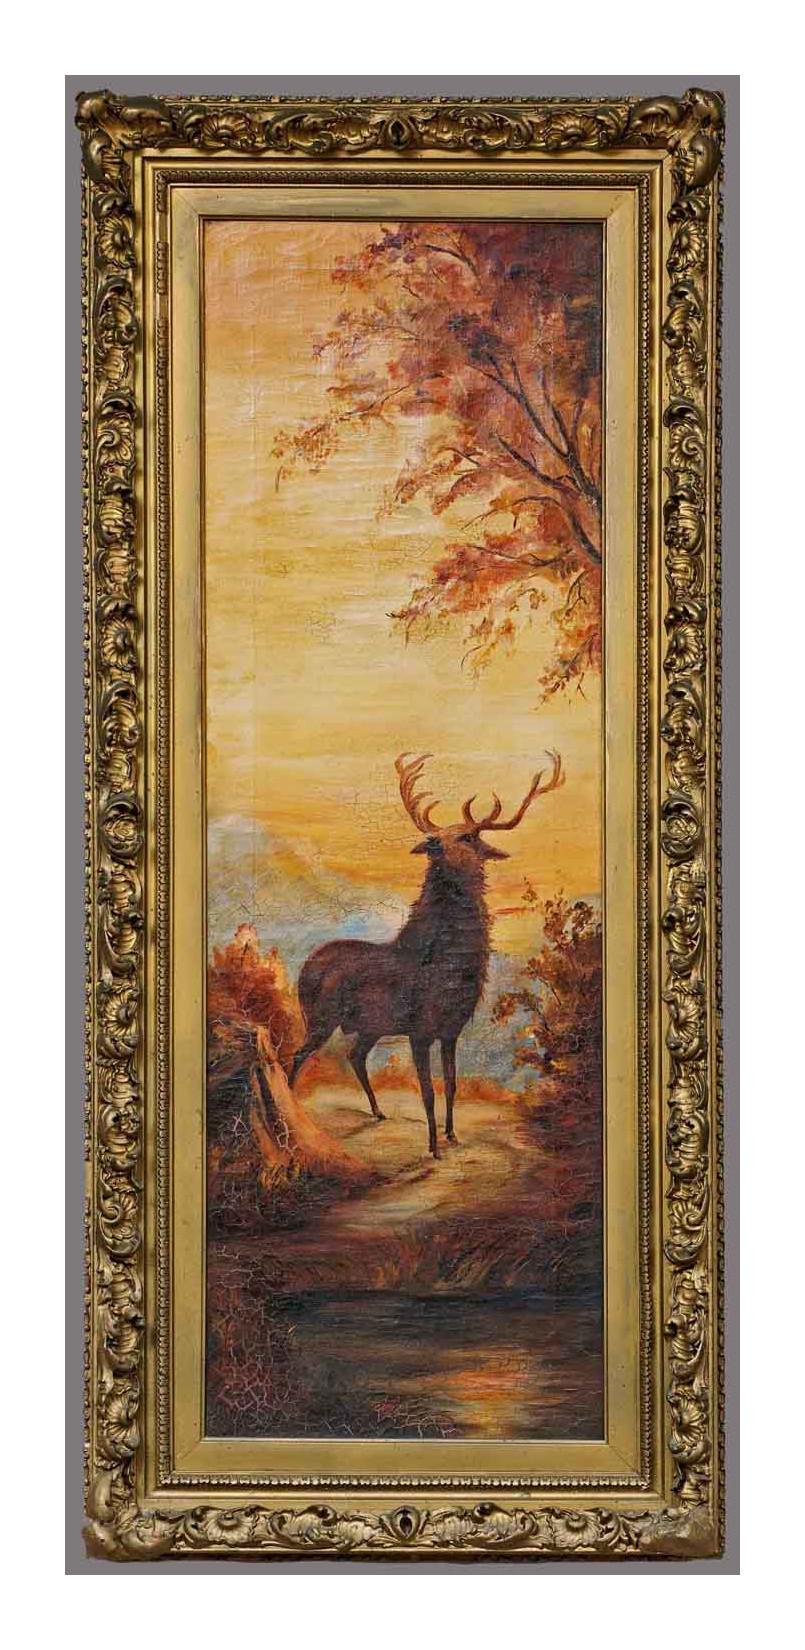 Two Stags in Winter Landscape, Twilight Oil on Canvas, Dated 1912 - Painting by Unknown